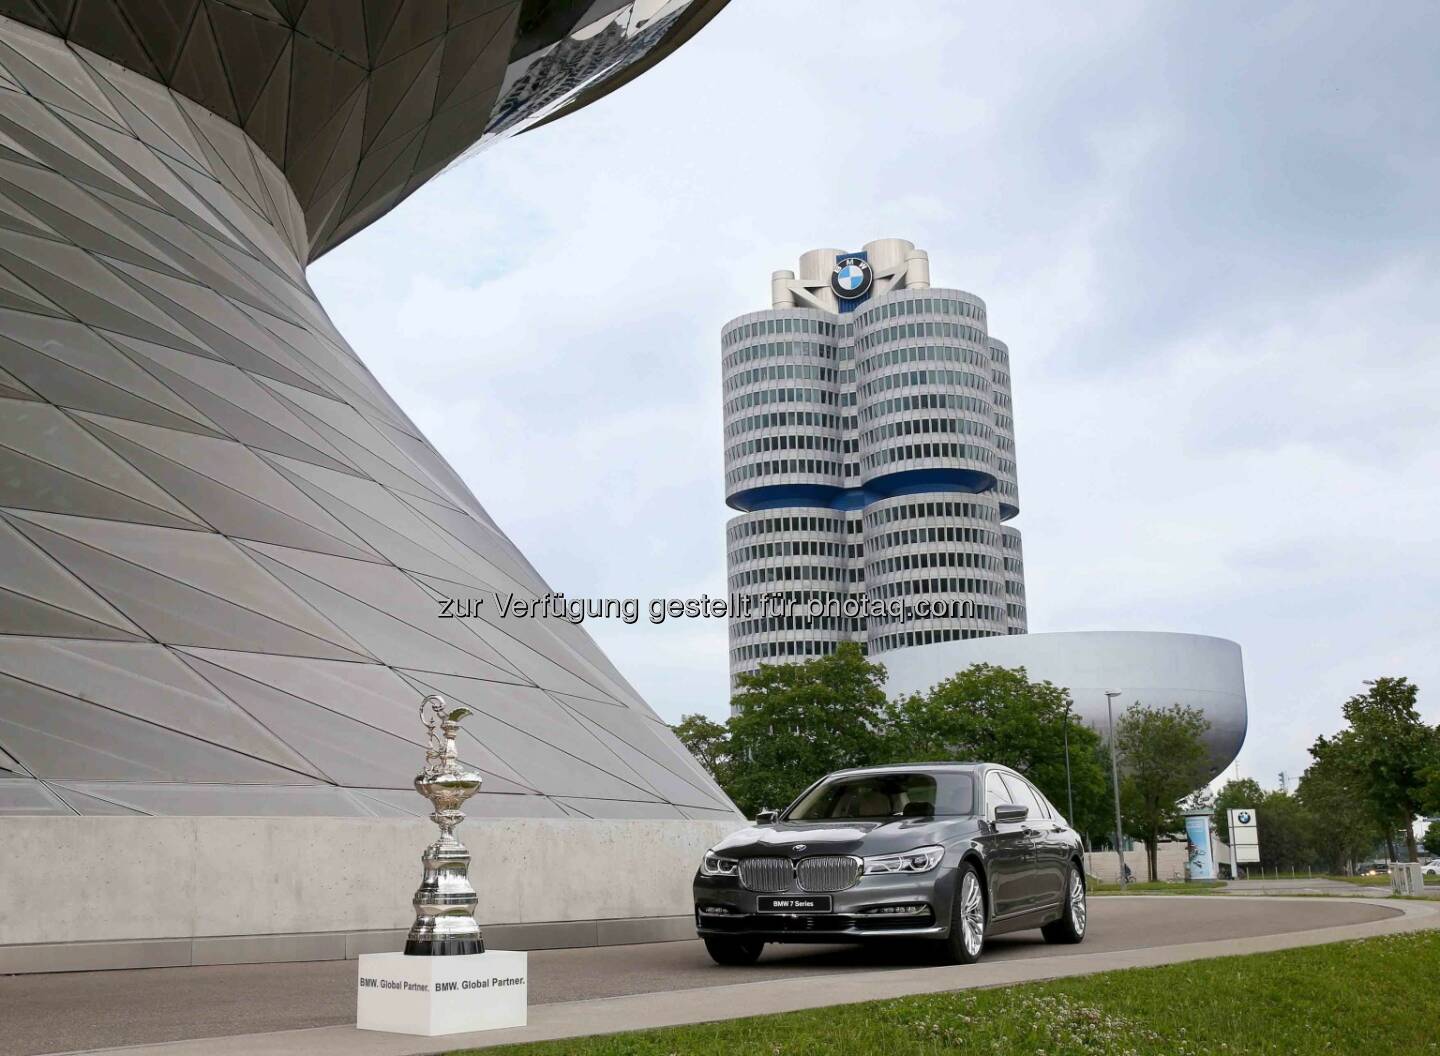 BMW wird „Global Partner“ des 35. America’s Cup.  (Photo by Alexander Hassenstein/Getty Images  For BMW)